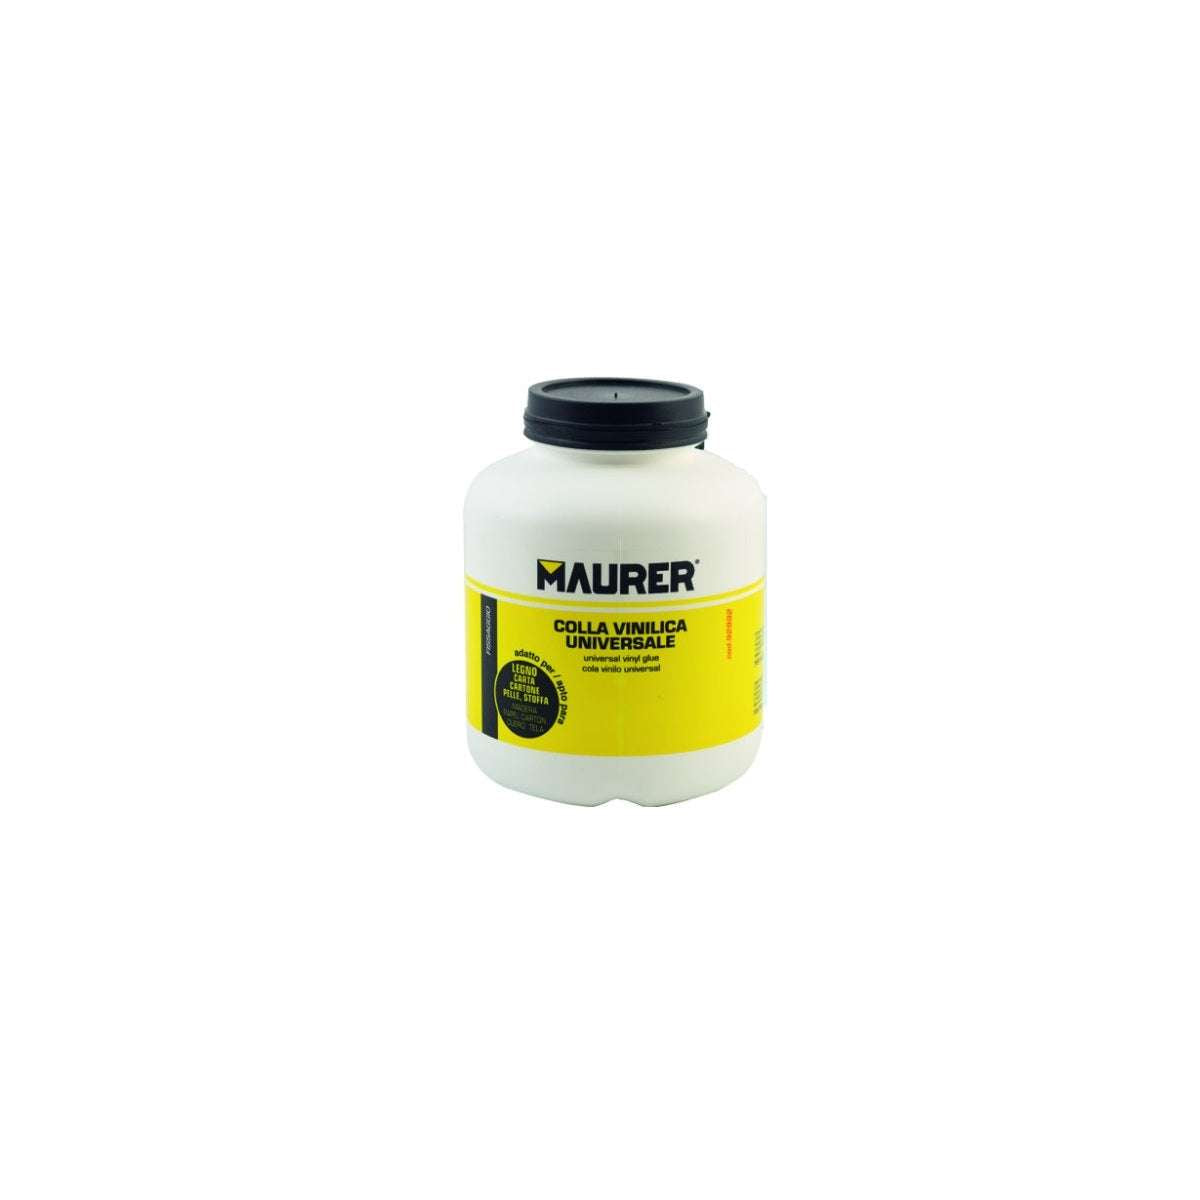 Universal vinyl glue for wood and wood derivatives, paper, cardboard, leather and fabric 1Kg - Maurer